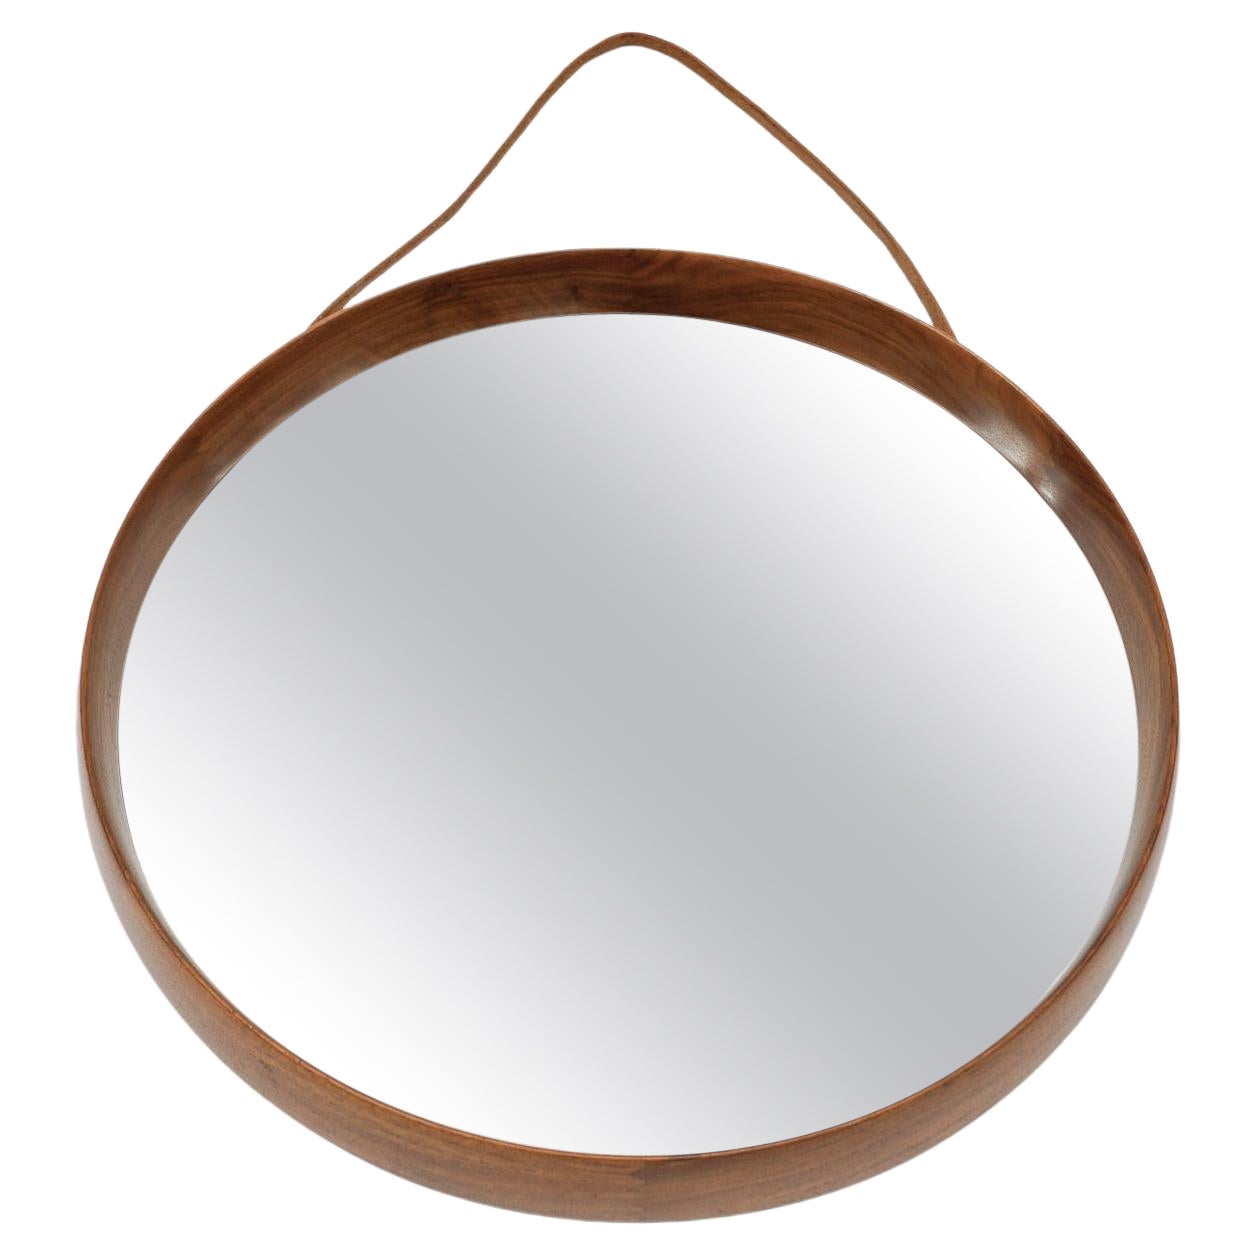 Lovely Round Wall Mirror in Teak and Leather, Sweden 1960s For Sale